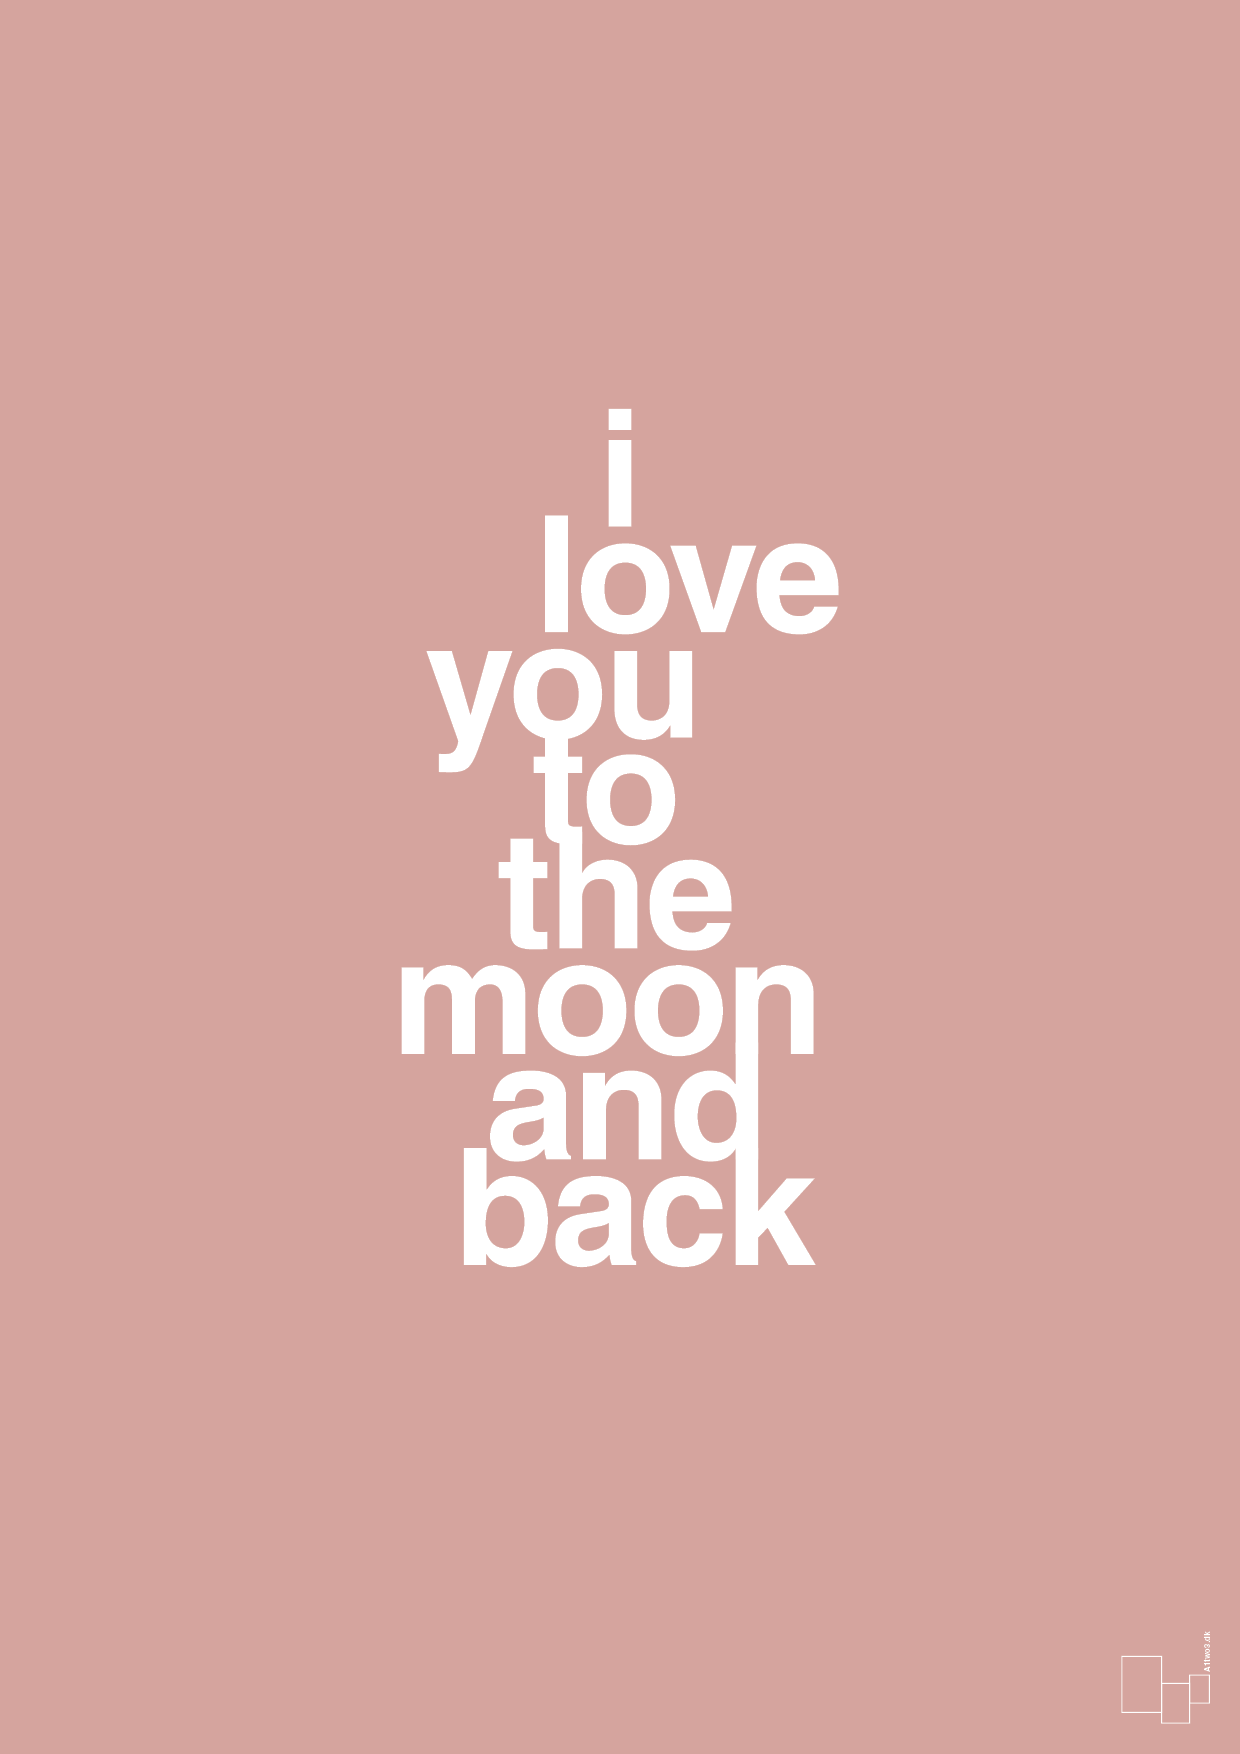 i love you to the moon and back - Plakat med Ordsprog i Bubble Shell